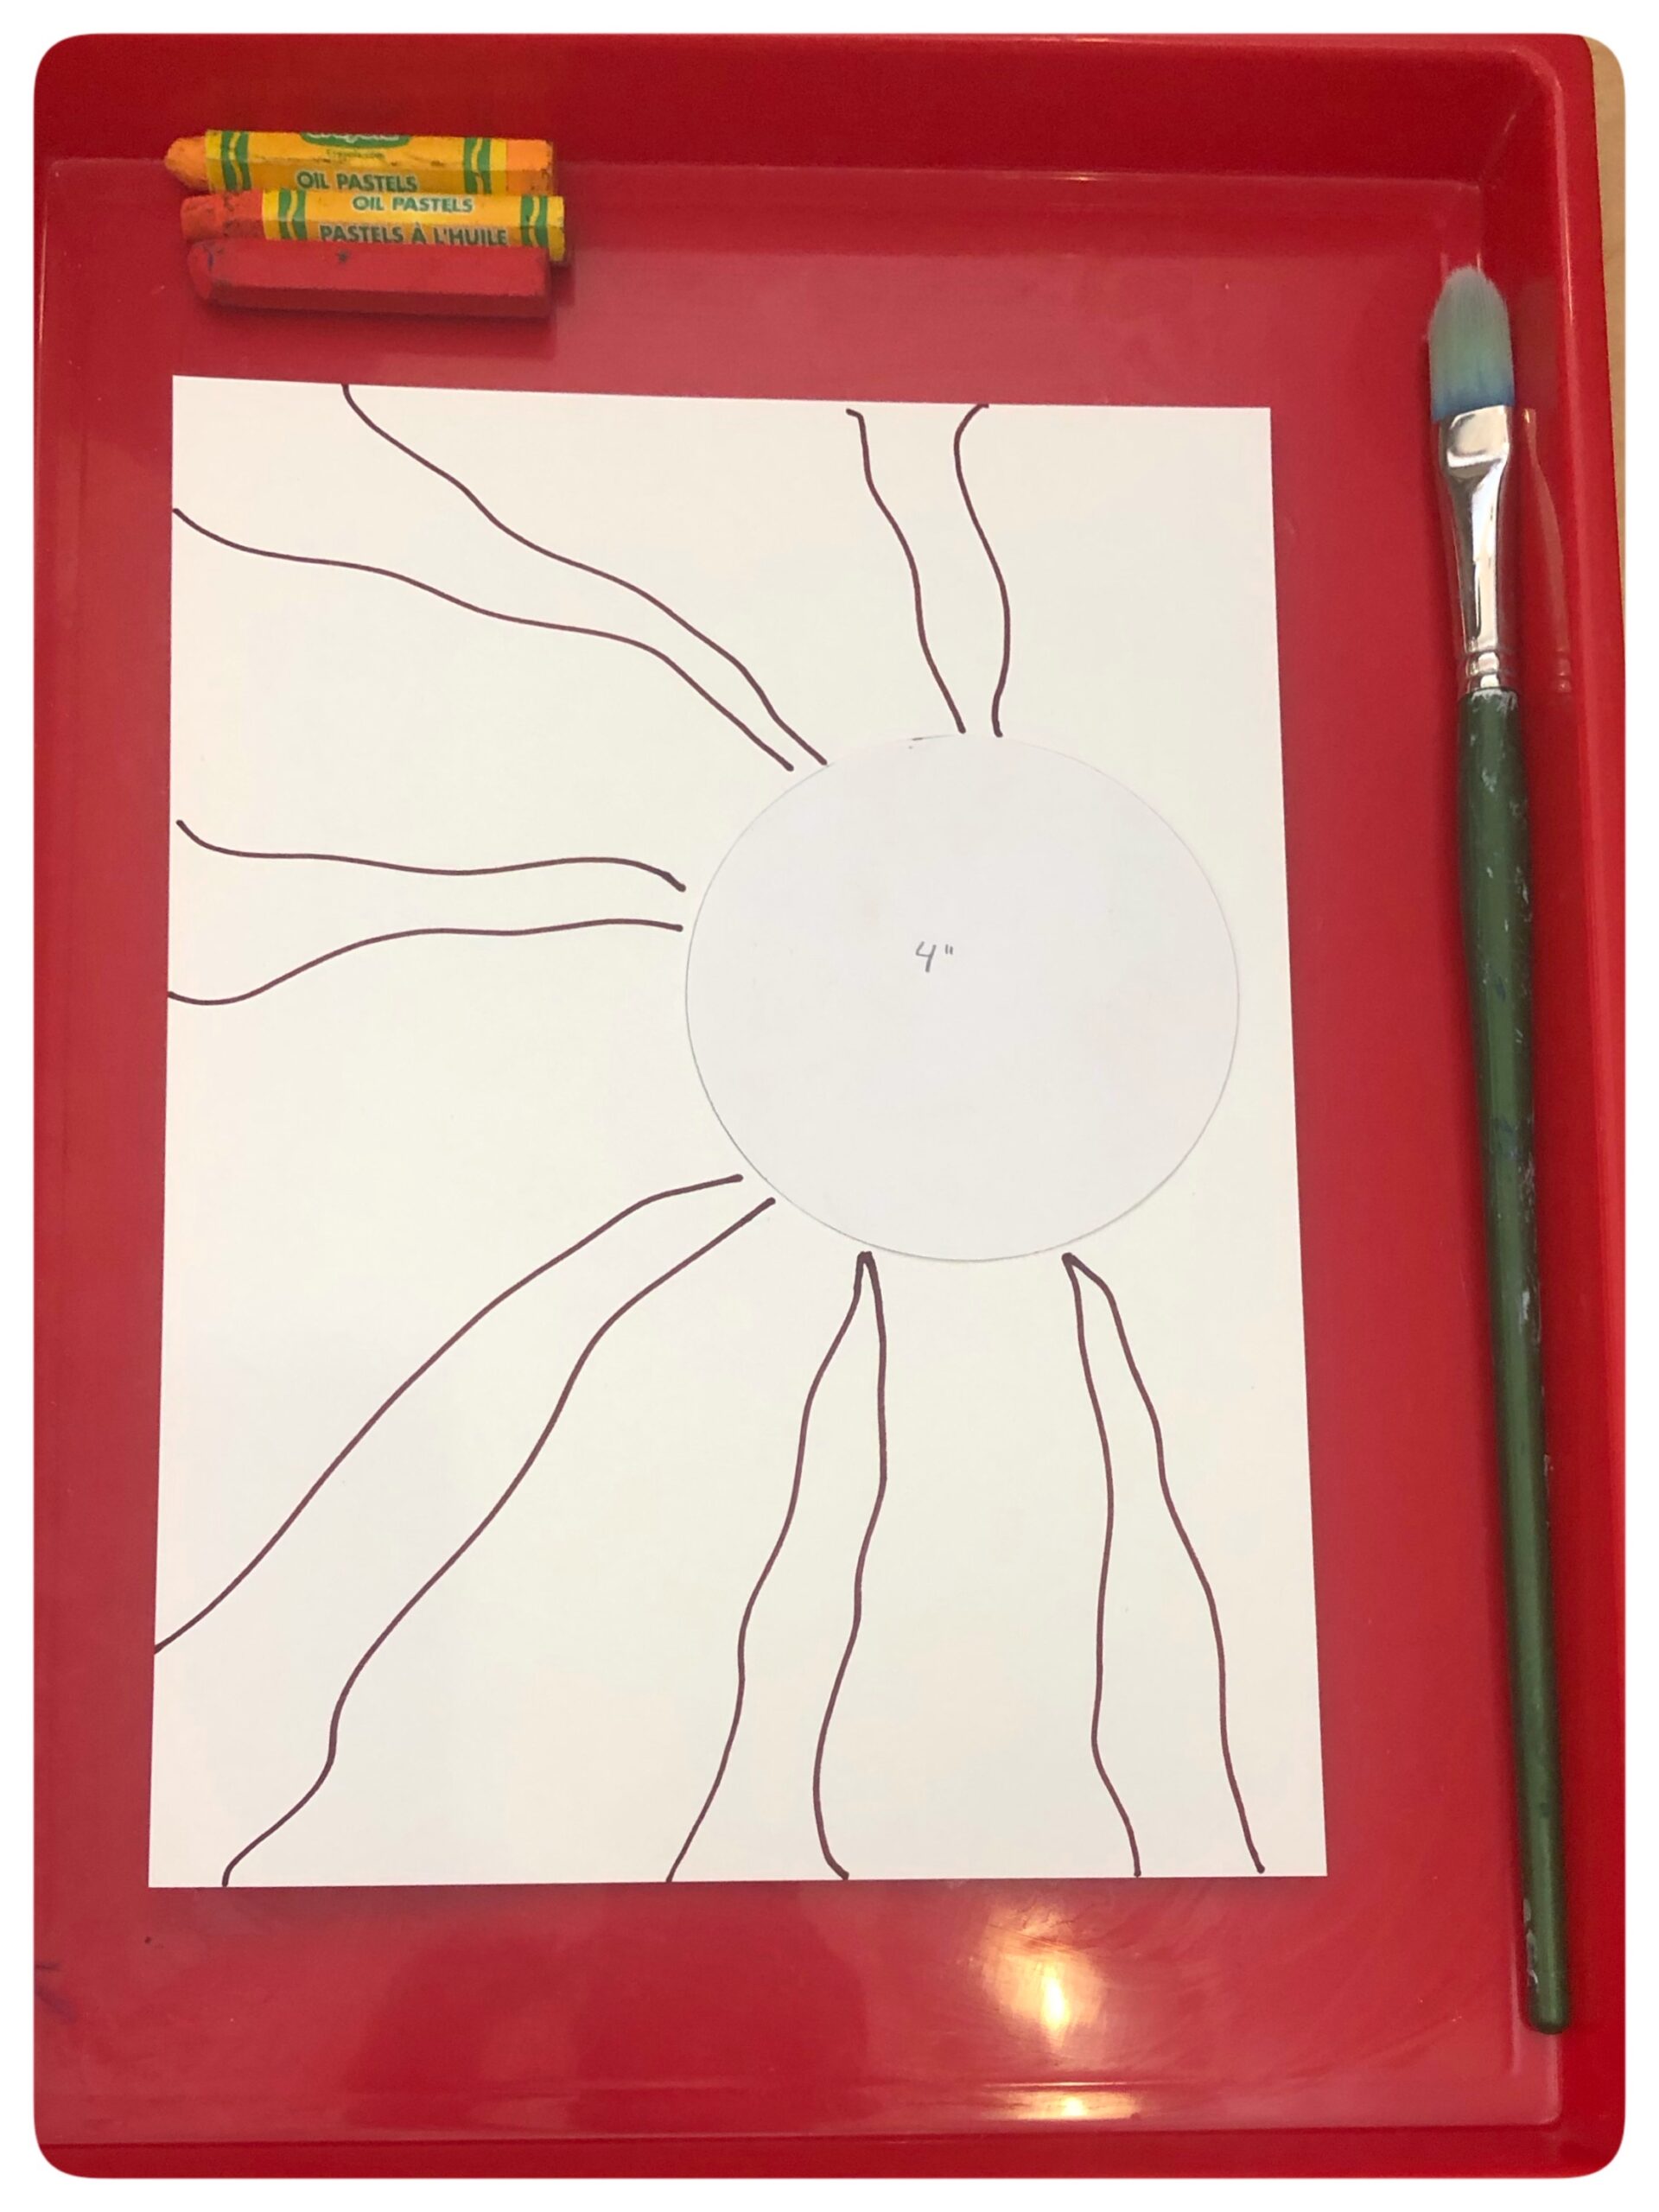 Creating ways to explore Autumn while learning about Perspective Drawing {giving a three-dimensional feeling to a flat image}